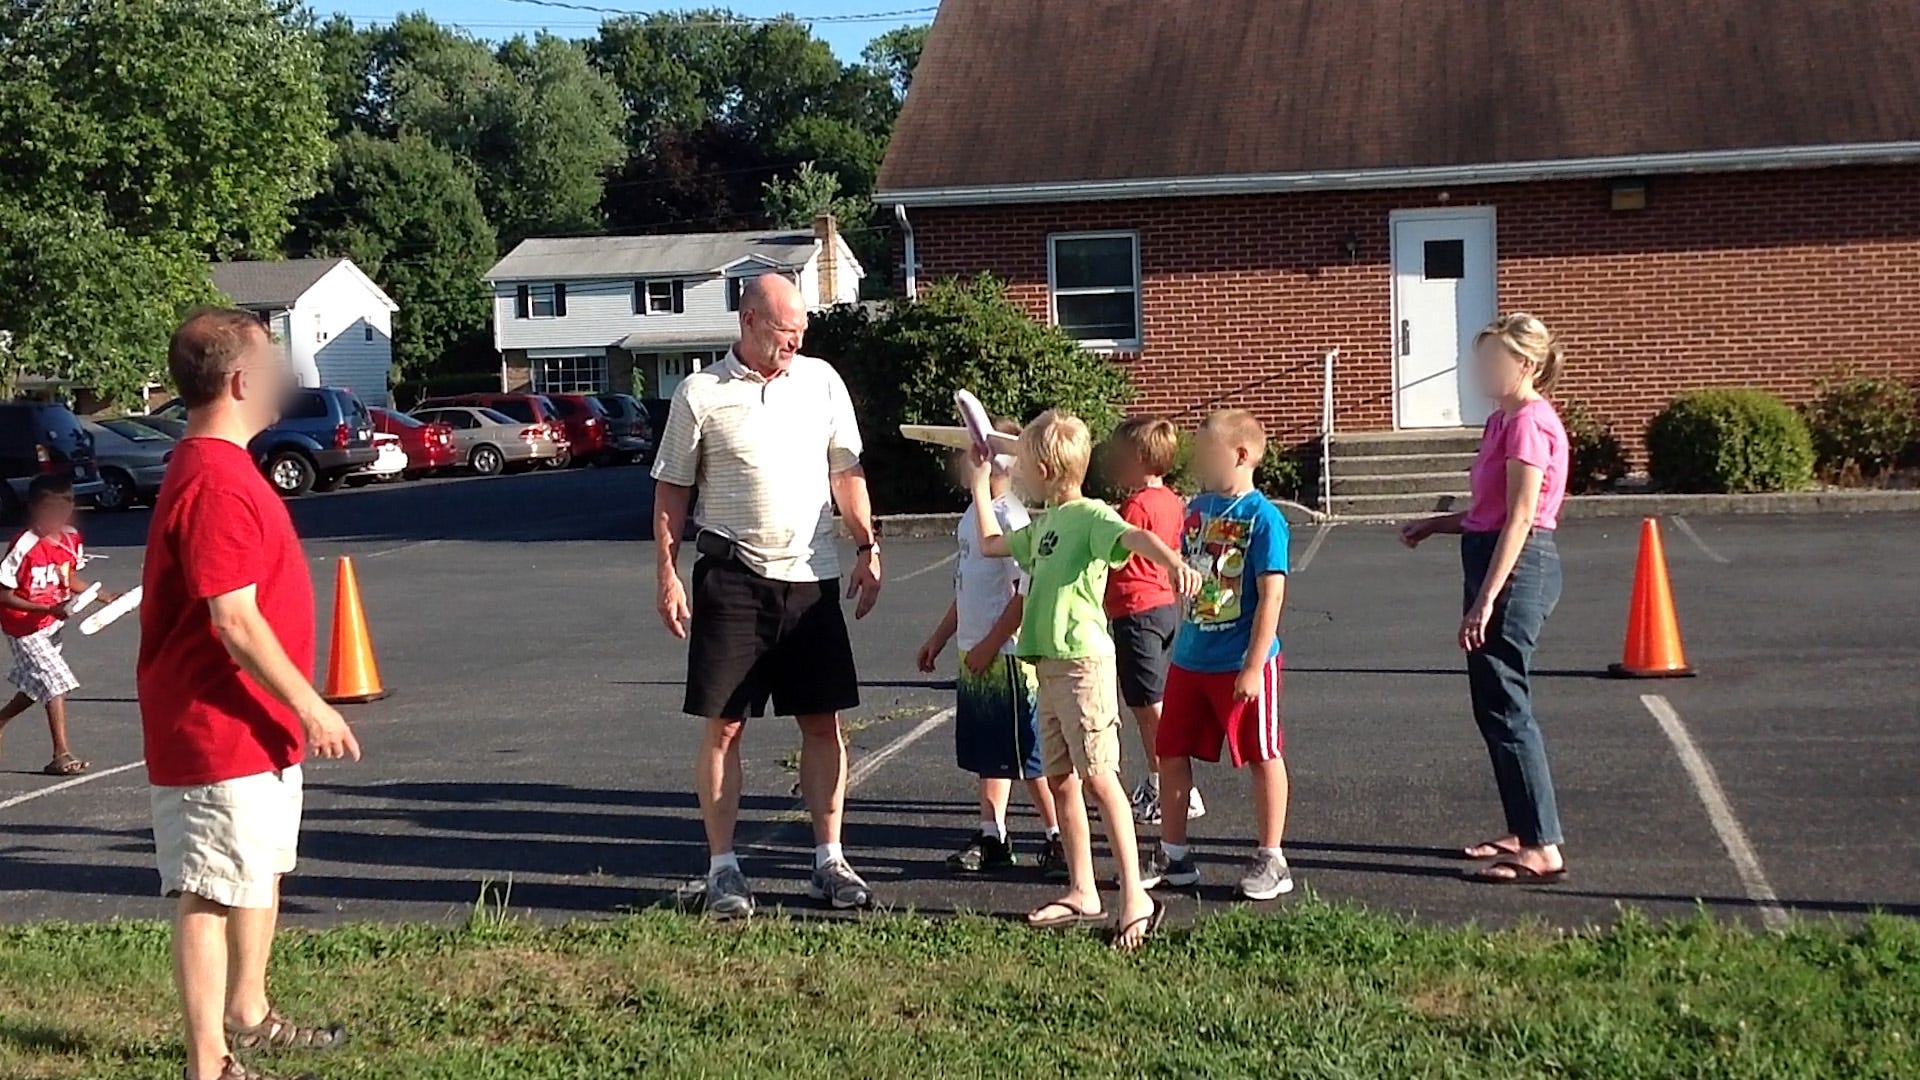 Donald Foose stands among a group of children at Oakwood Baptist Church's Vacation Bible School in 2012. USA TODAY has blurred the faces of some individuals to protect their anonymity.